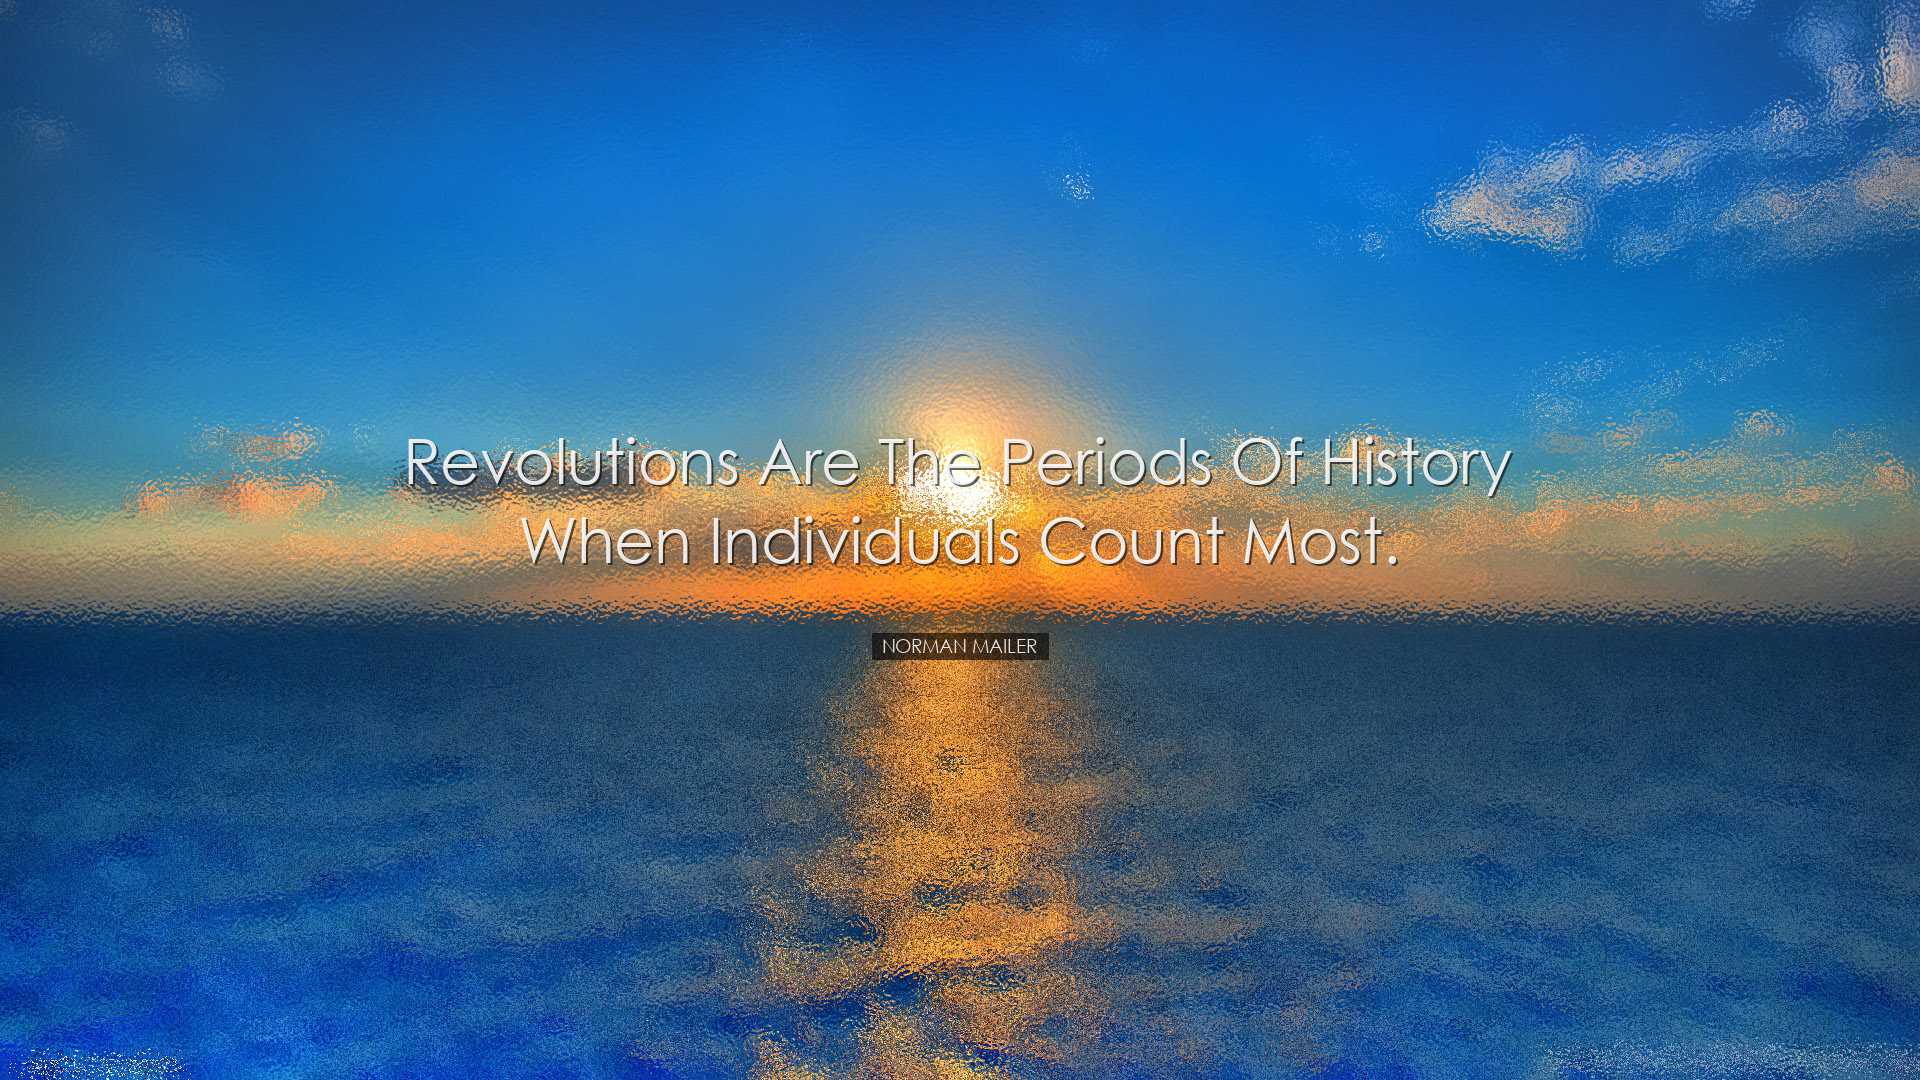 Revolutions are the periods of history when individuals count most